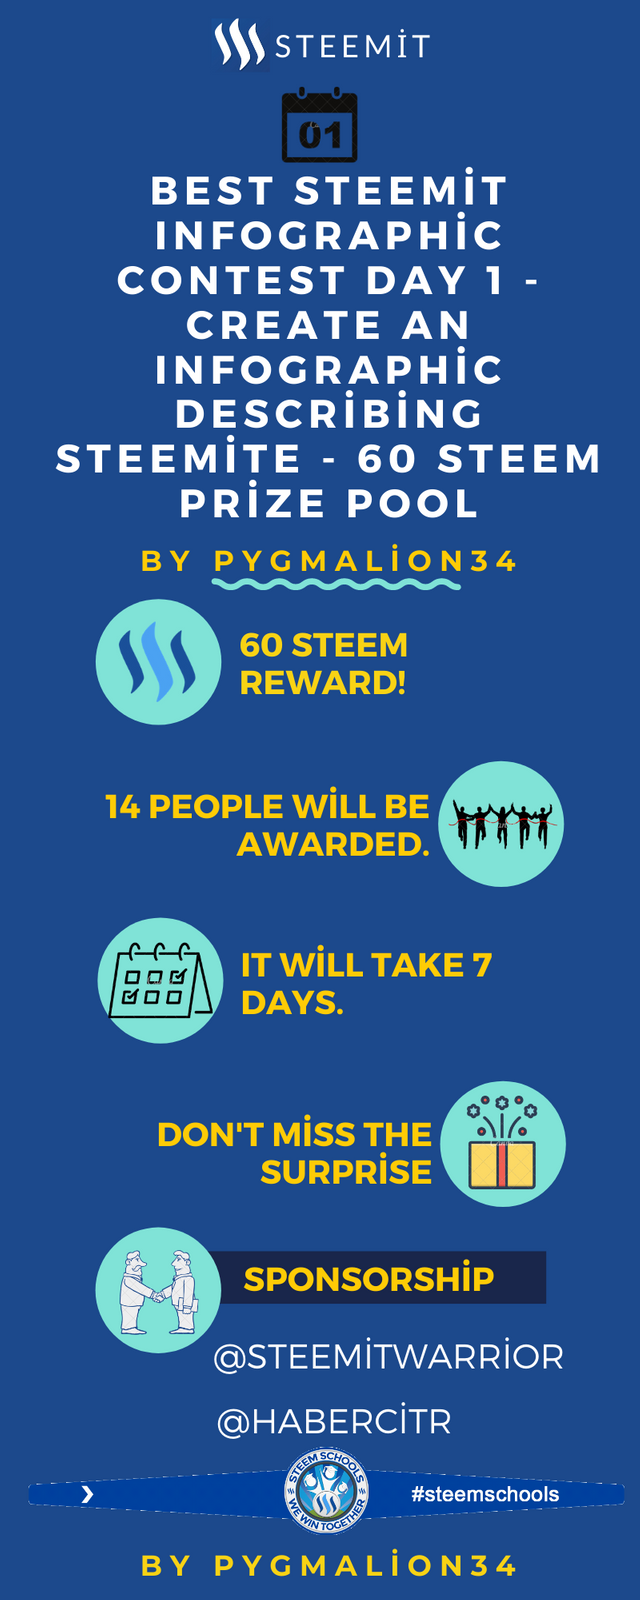 Best Steemit Infographic Contest Day 1 - Create an Infographic Describing Steemite - 60 STEEM Prize Pool (1).png